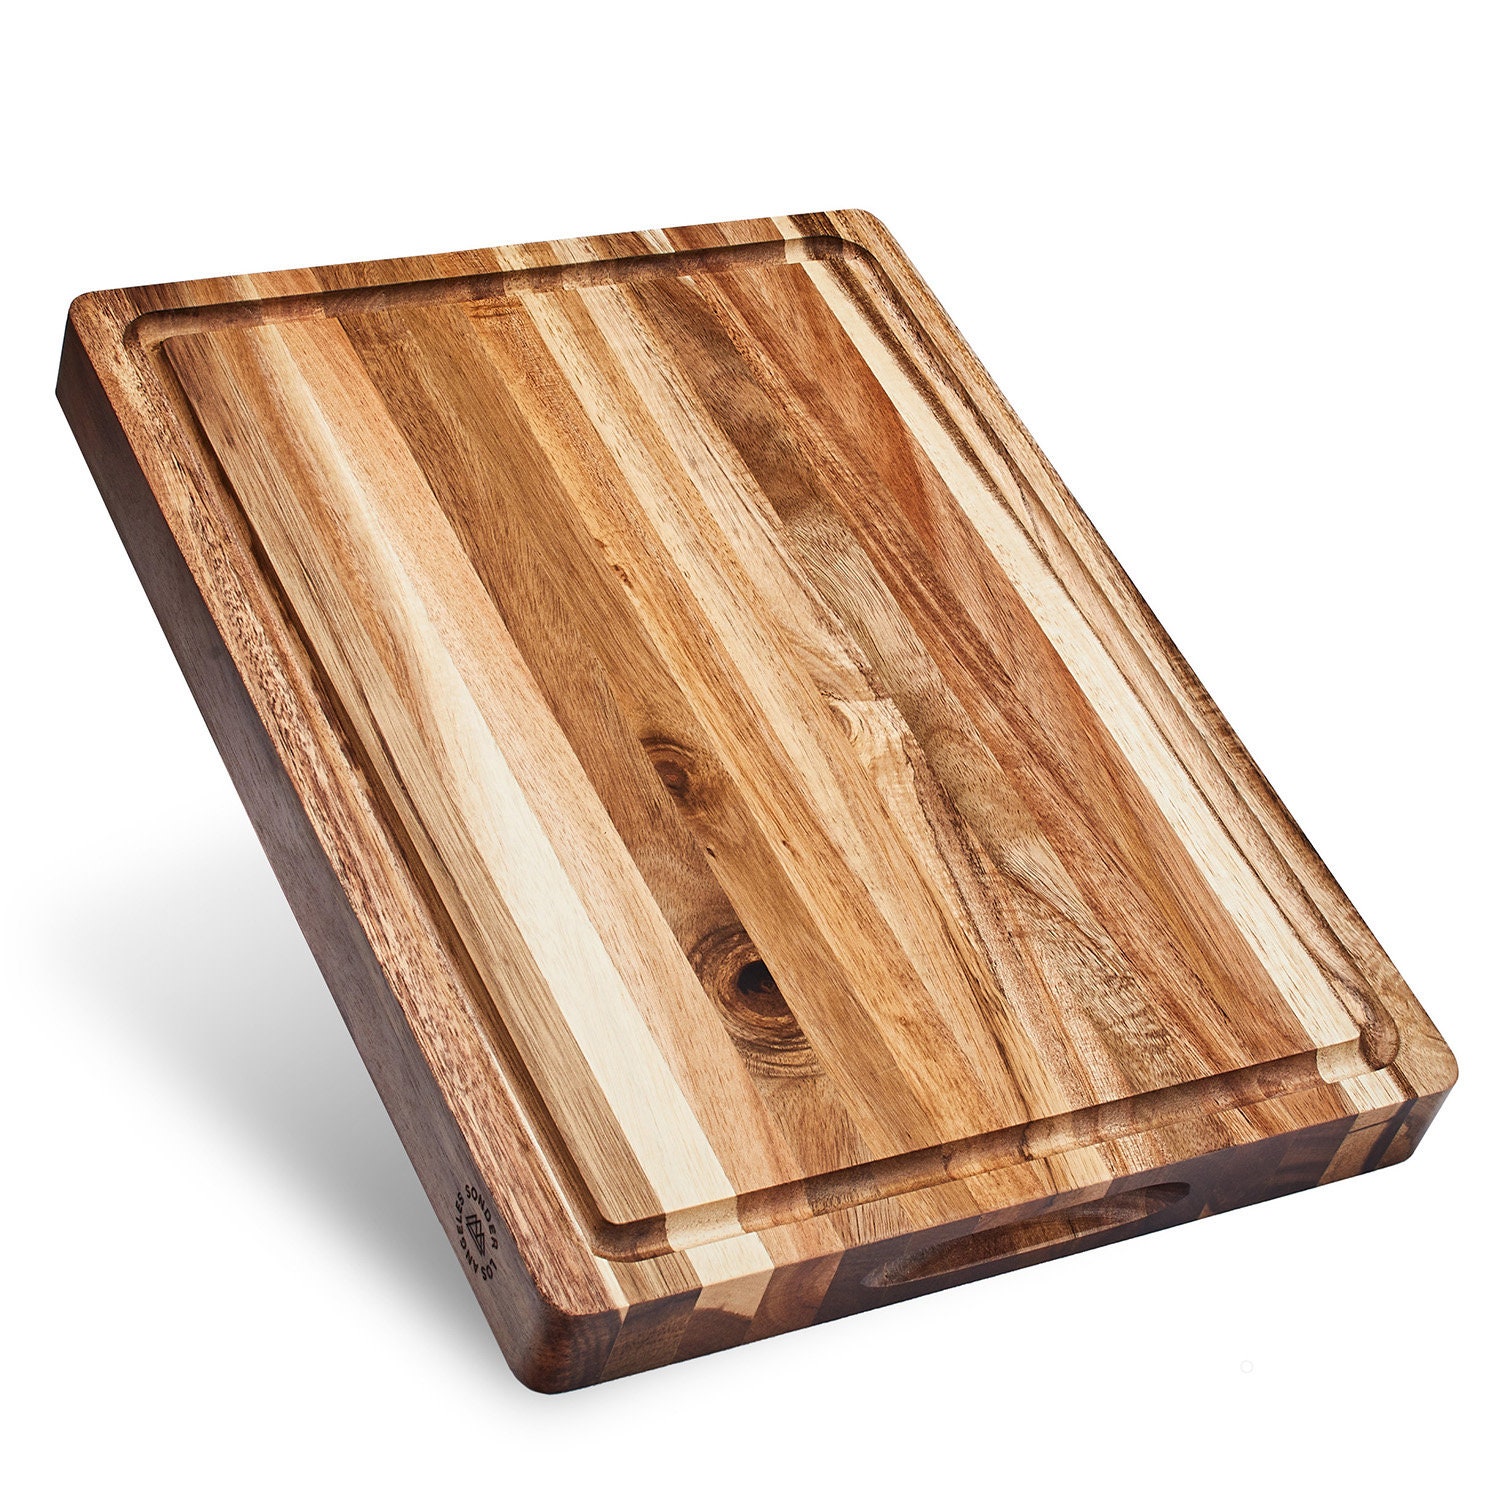 Sonder Los Angeles, XXL Thick Edge Grain Teak Wood Cutting Board for  Kitchen with Juice Groove, 23x17x1.5 Charcuterie Wooden Board in Large  (Gift Box